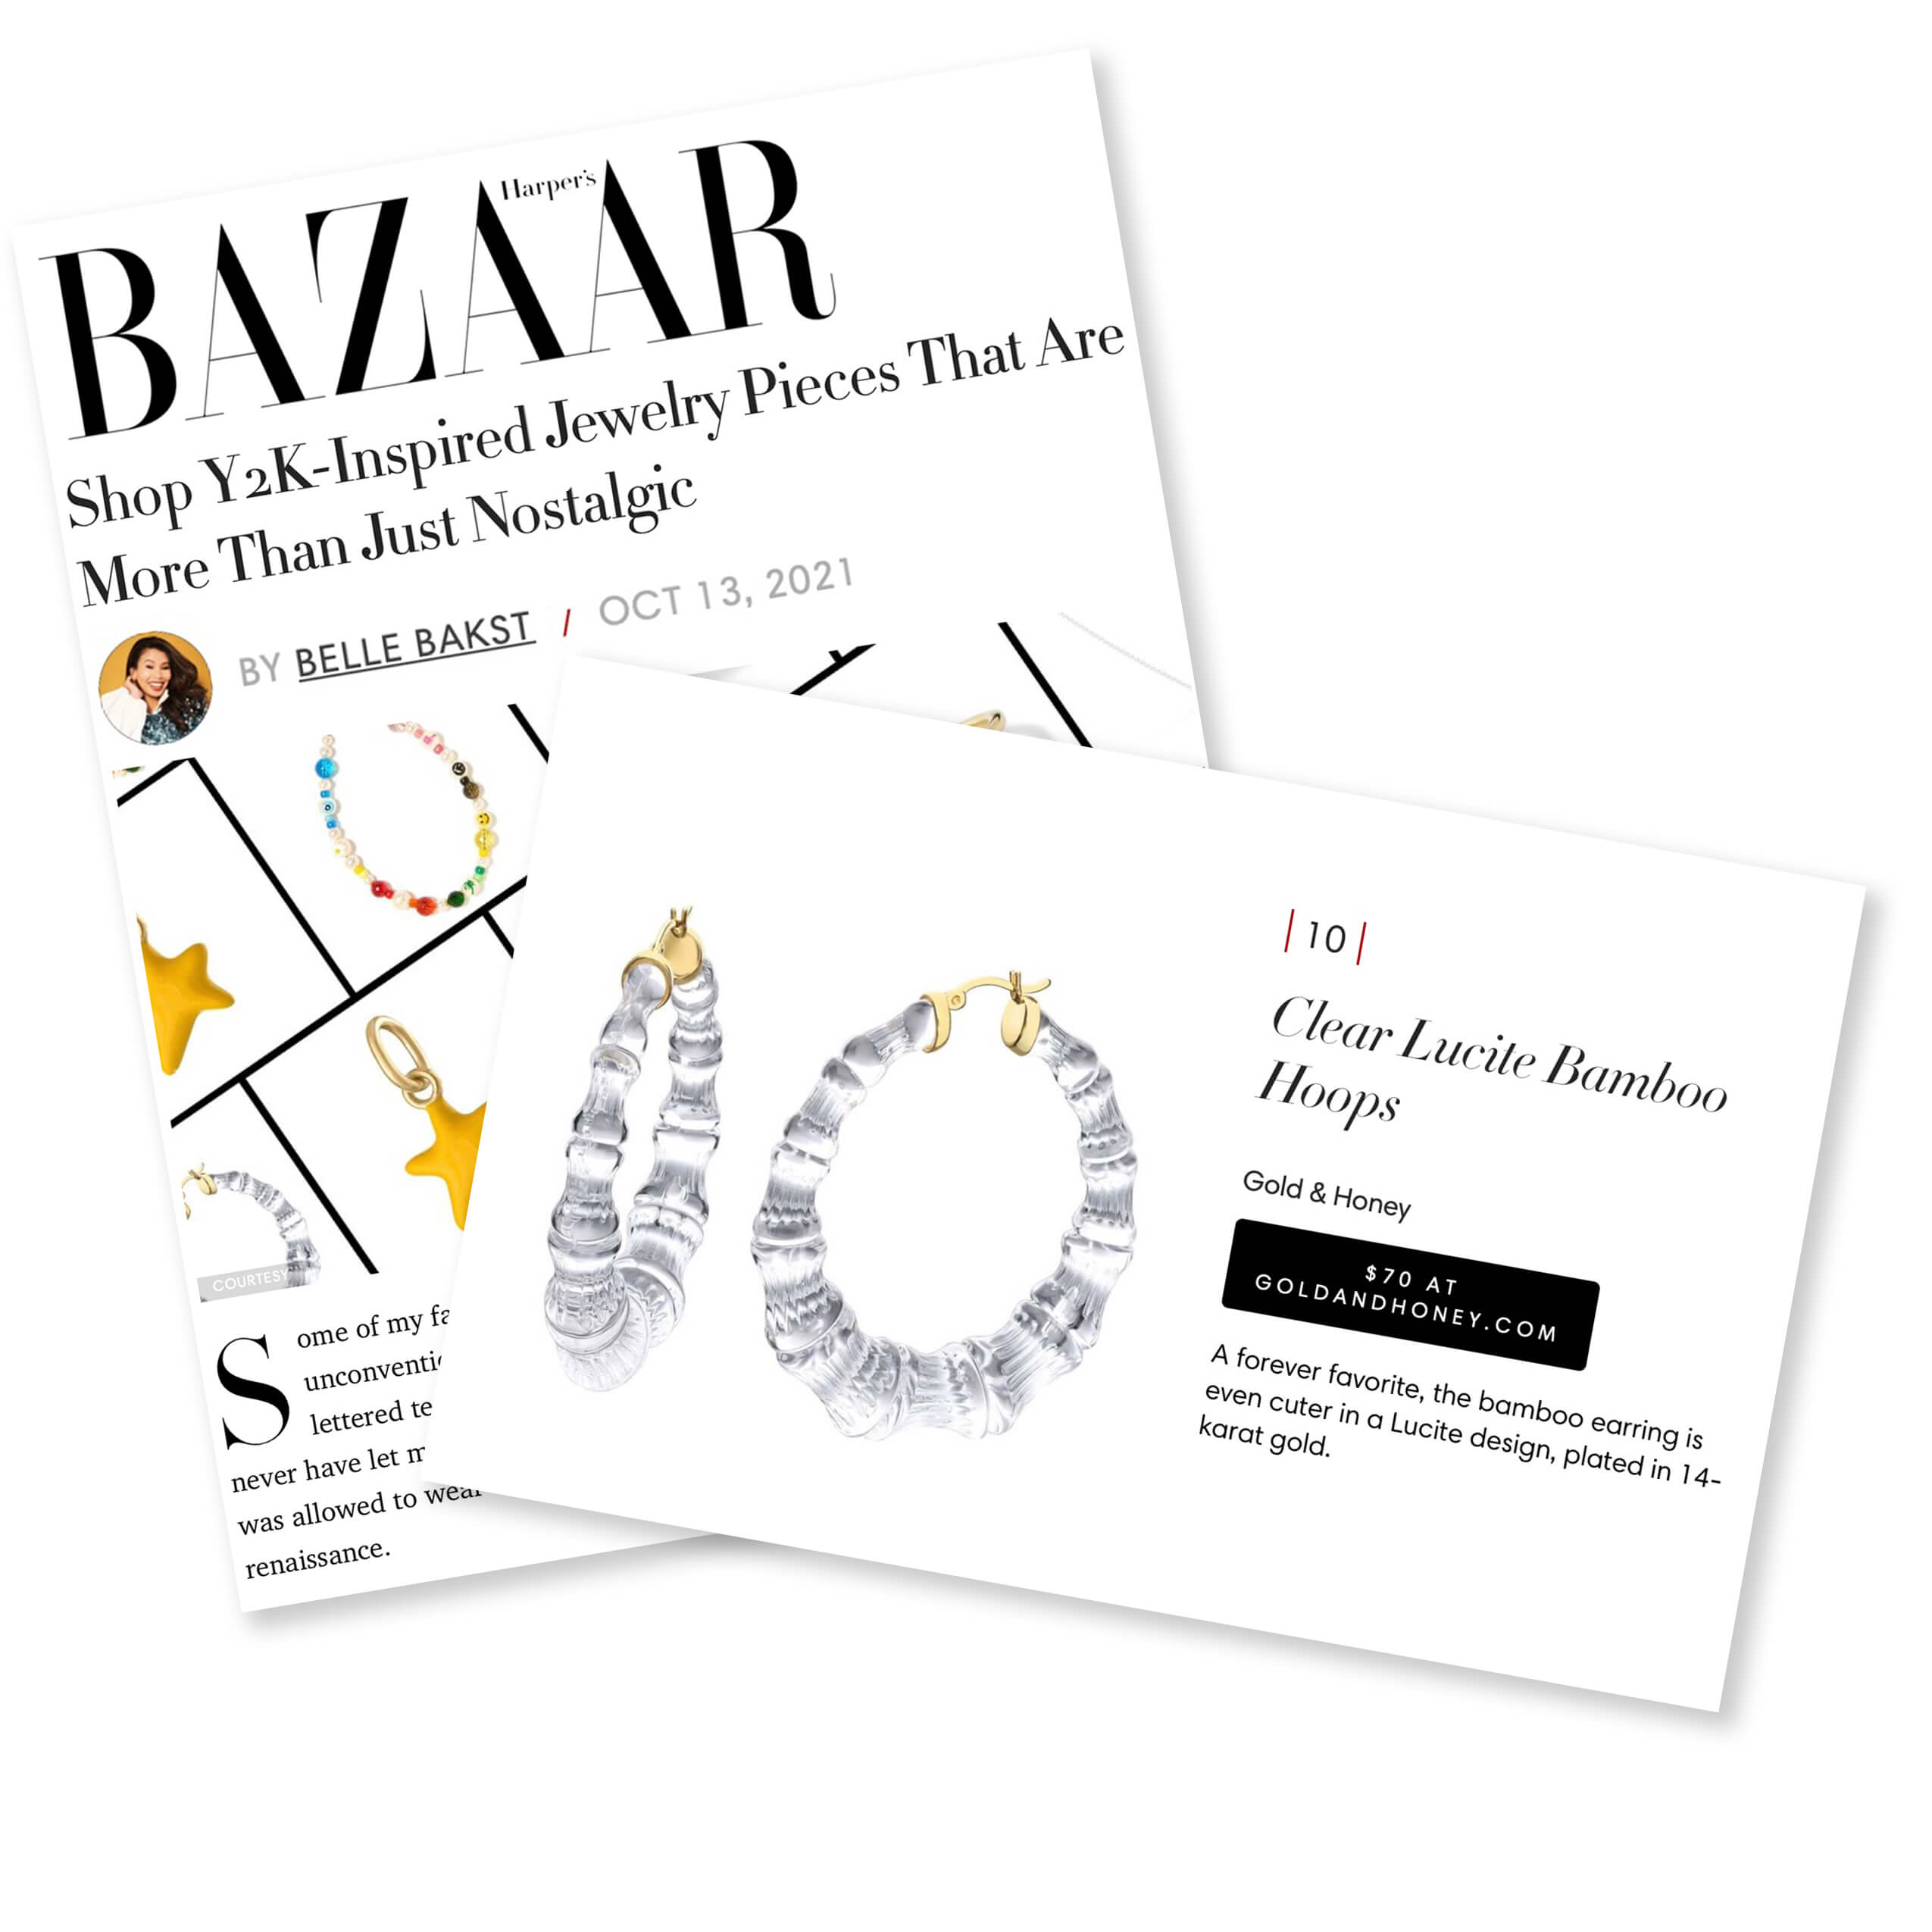 Our Clear Bamboo Hoops were featured in Harper's Bazaar as top must-have jewelry for 2021